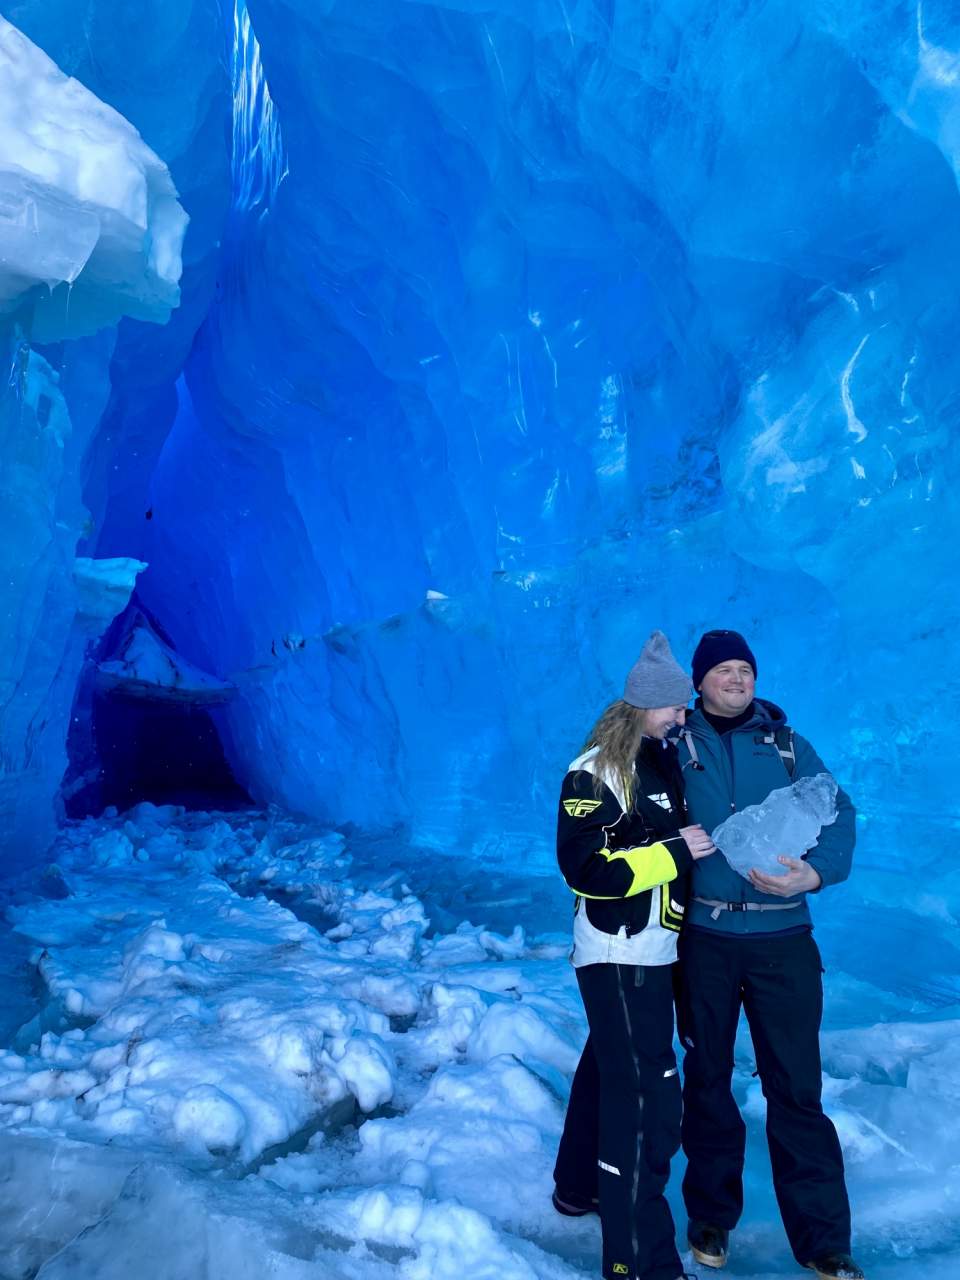 If conditions permit, discover the ice caves of Spencer Glacier